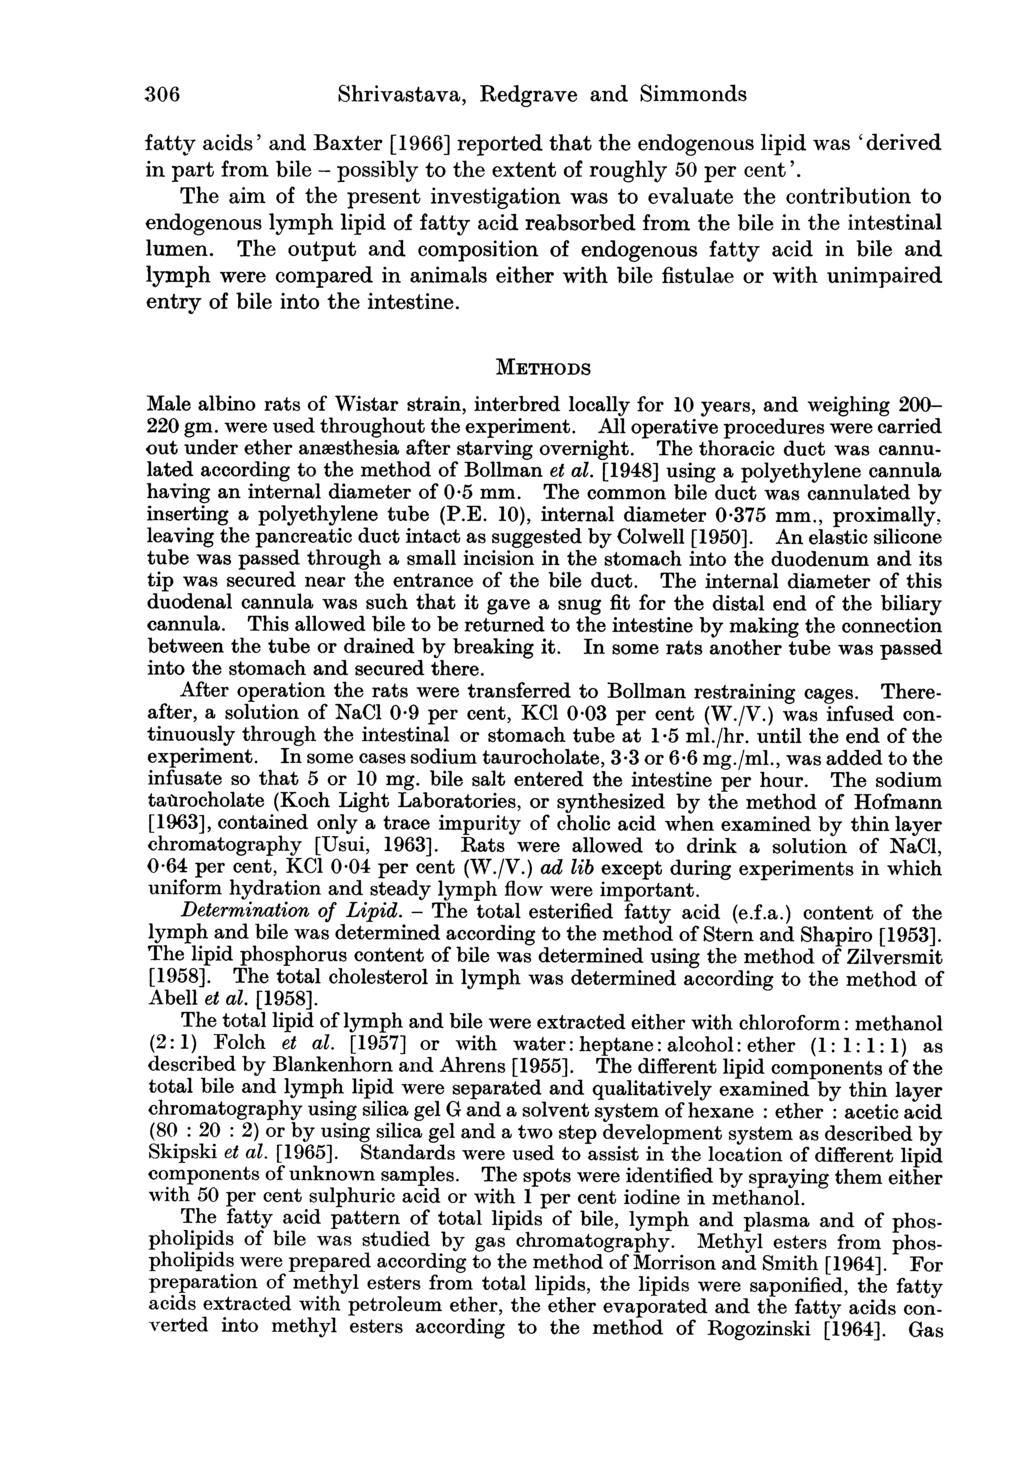 306 Shrivastava, Redgrave and Simmonds fatty acids' and Baxter [1966] reported that the endogenous lipid was 'derived in part from bile - possibly to the extent of roughly 50 per cent'.